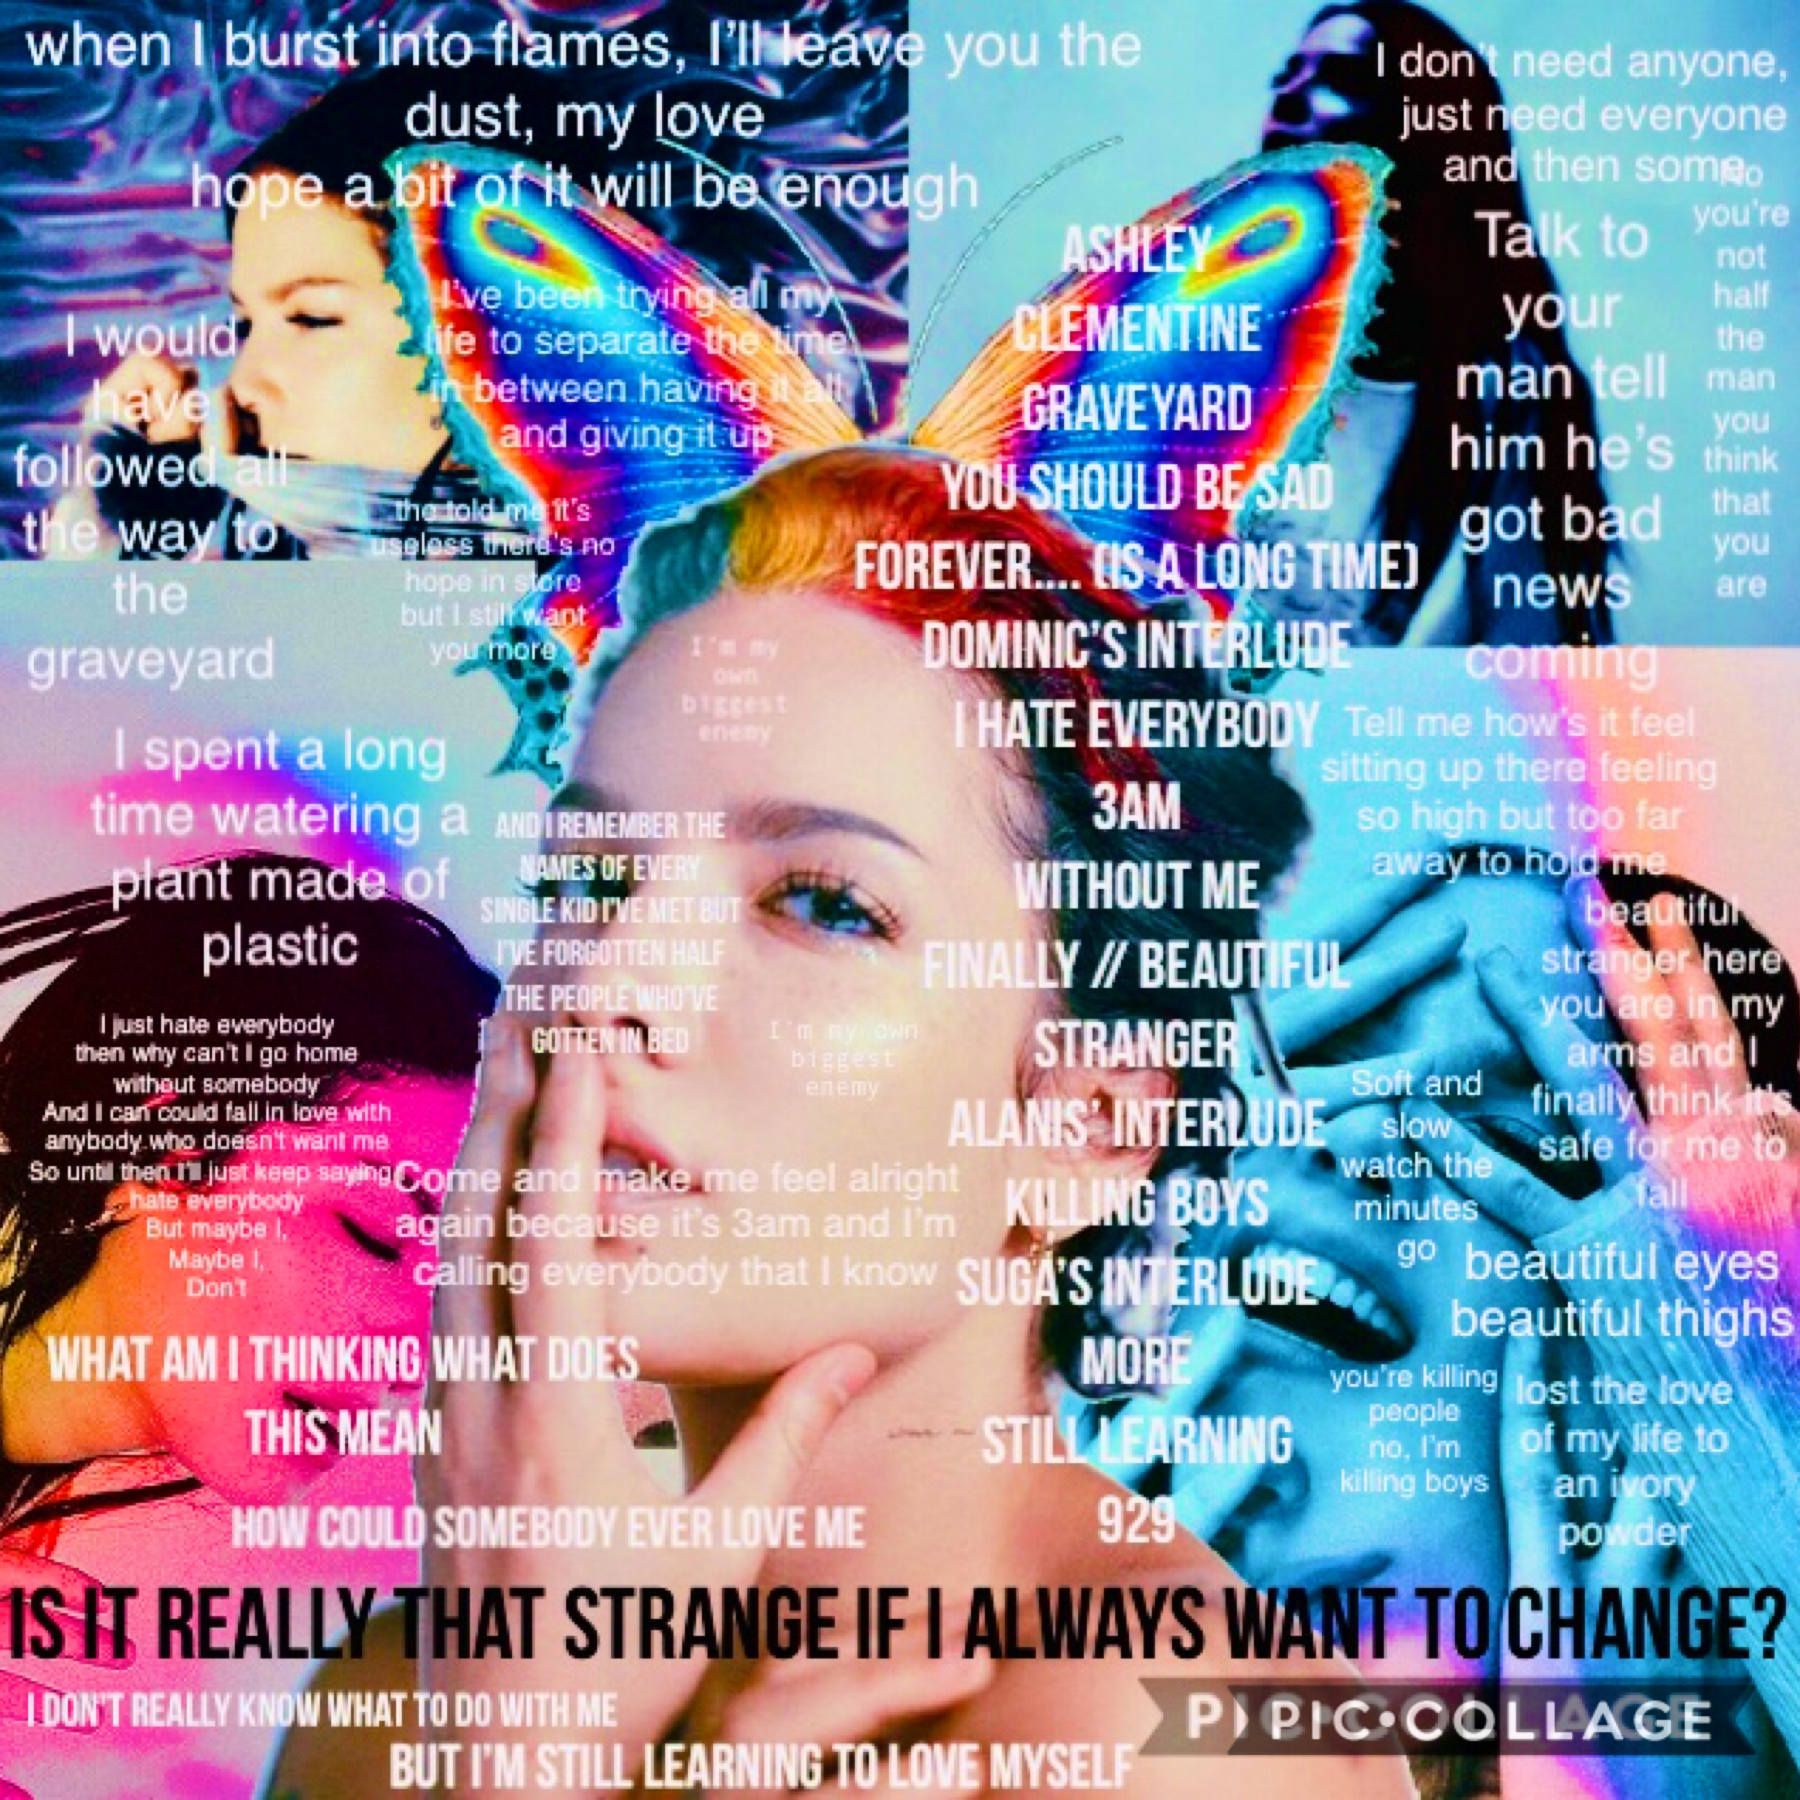 ✨ MANIC — TAP ✨
Hi guys!! I know this is kind of chaotic but I wanted to really capture the essence of the album. This is album is so gorgeous and I think that Halsey made it gorgeous lyrically and vocally. You can tell that this is her most diverse and v